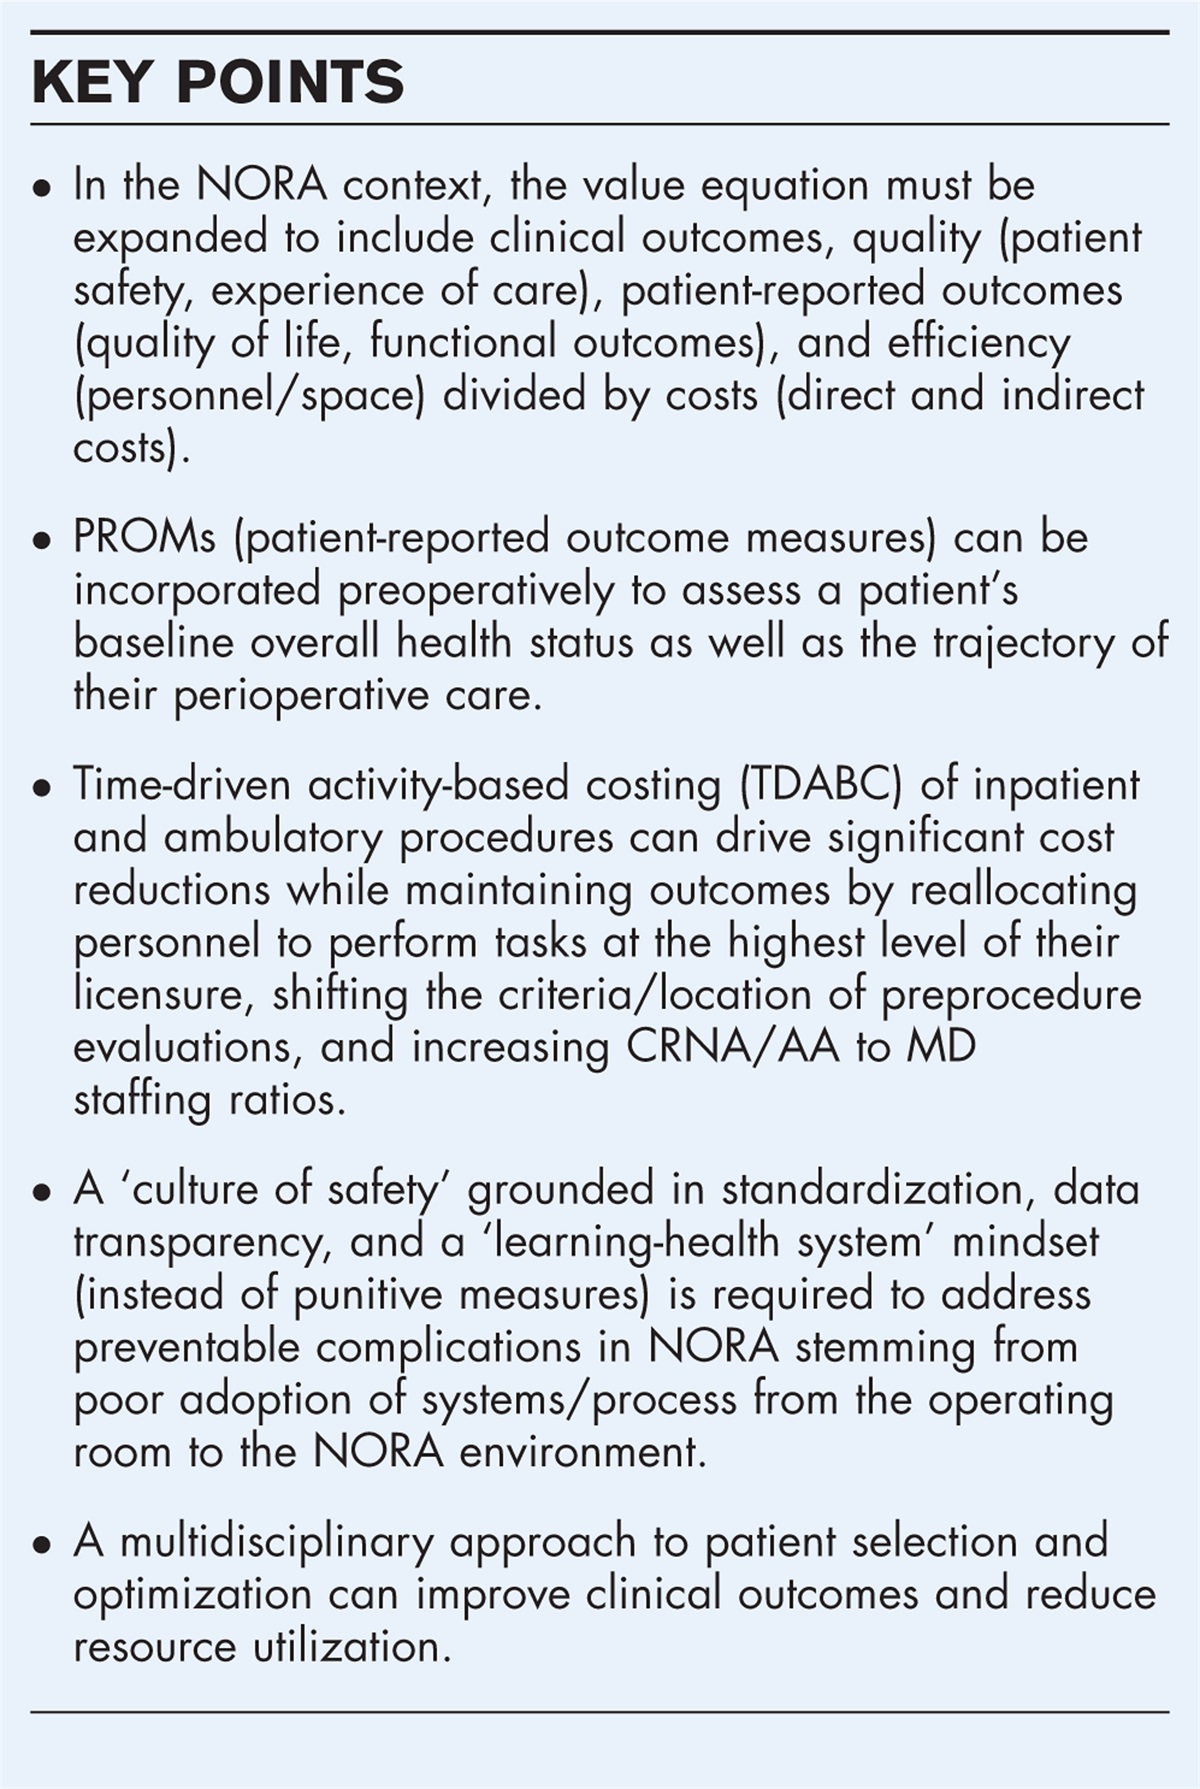 Frameworks for value-based care in the nonoperating room setting